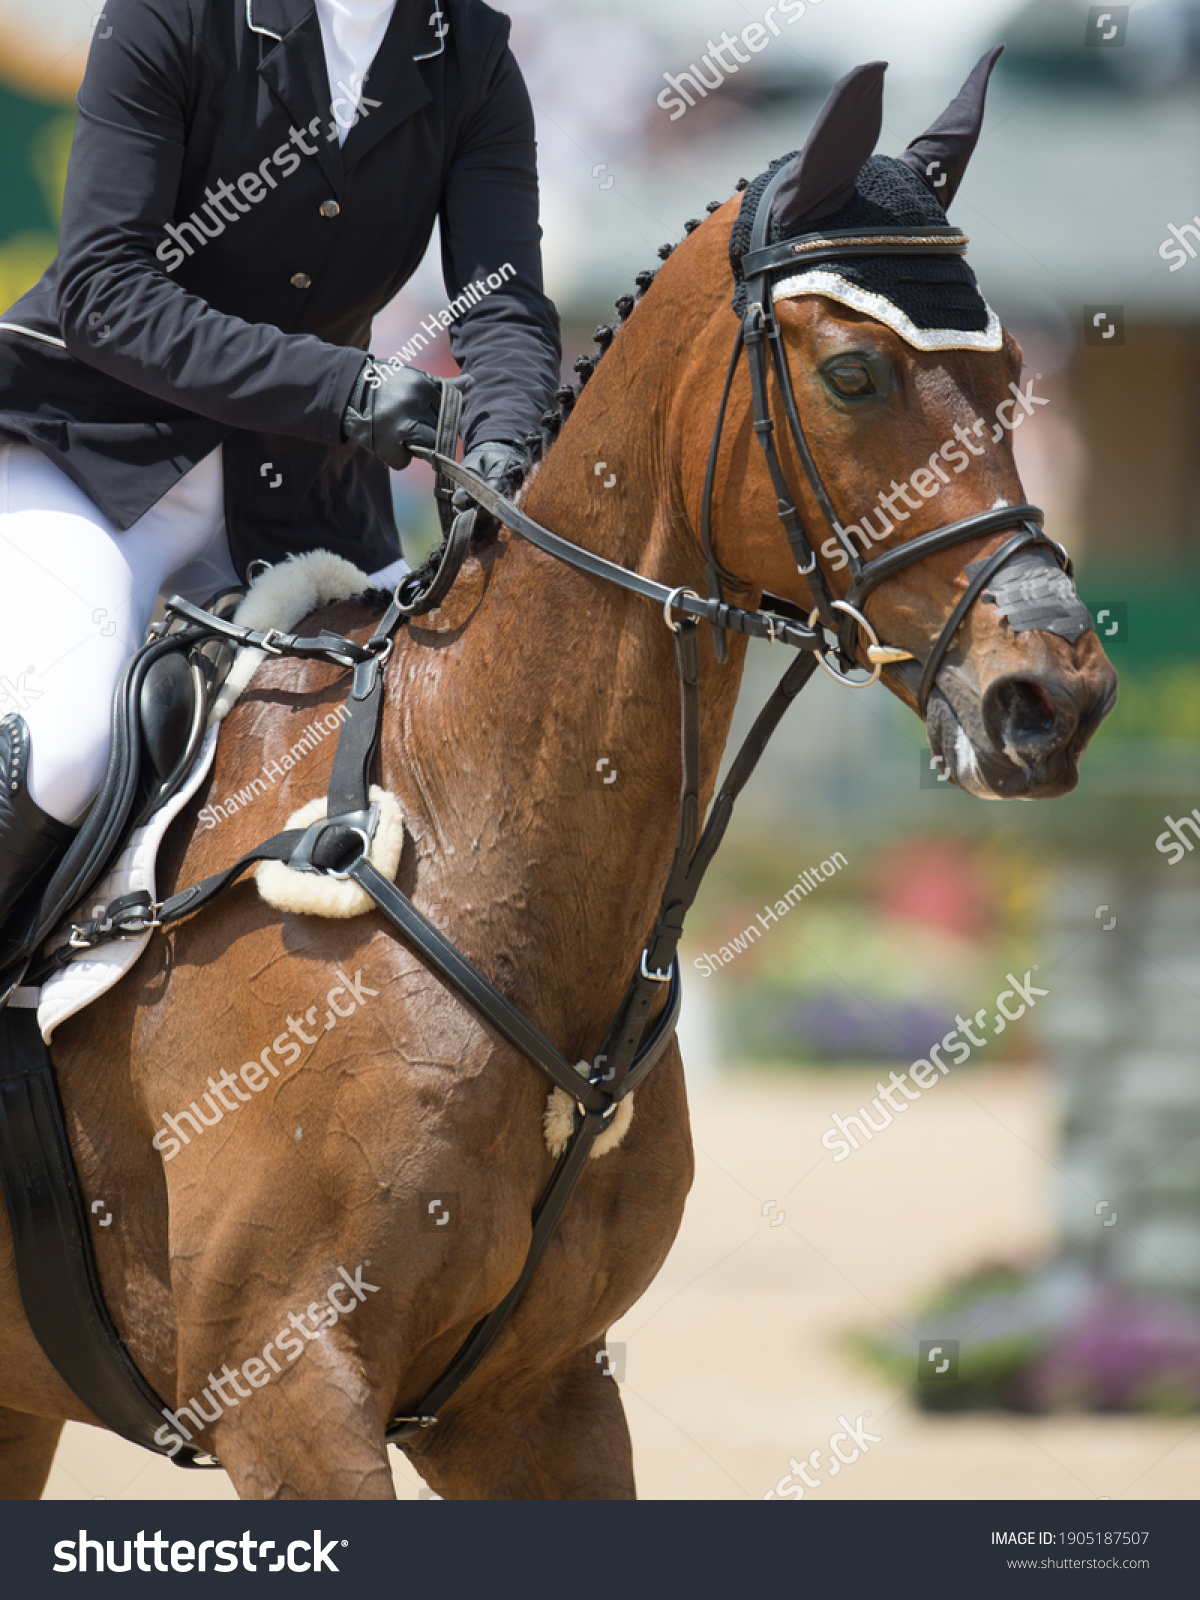 english rider on horse in show jumping competition close cropped horse wearing english tack with bridle martingale and fuzzy around nose band  #1905187507